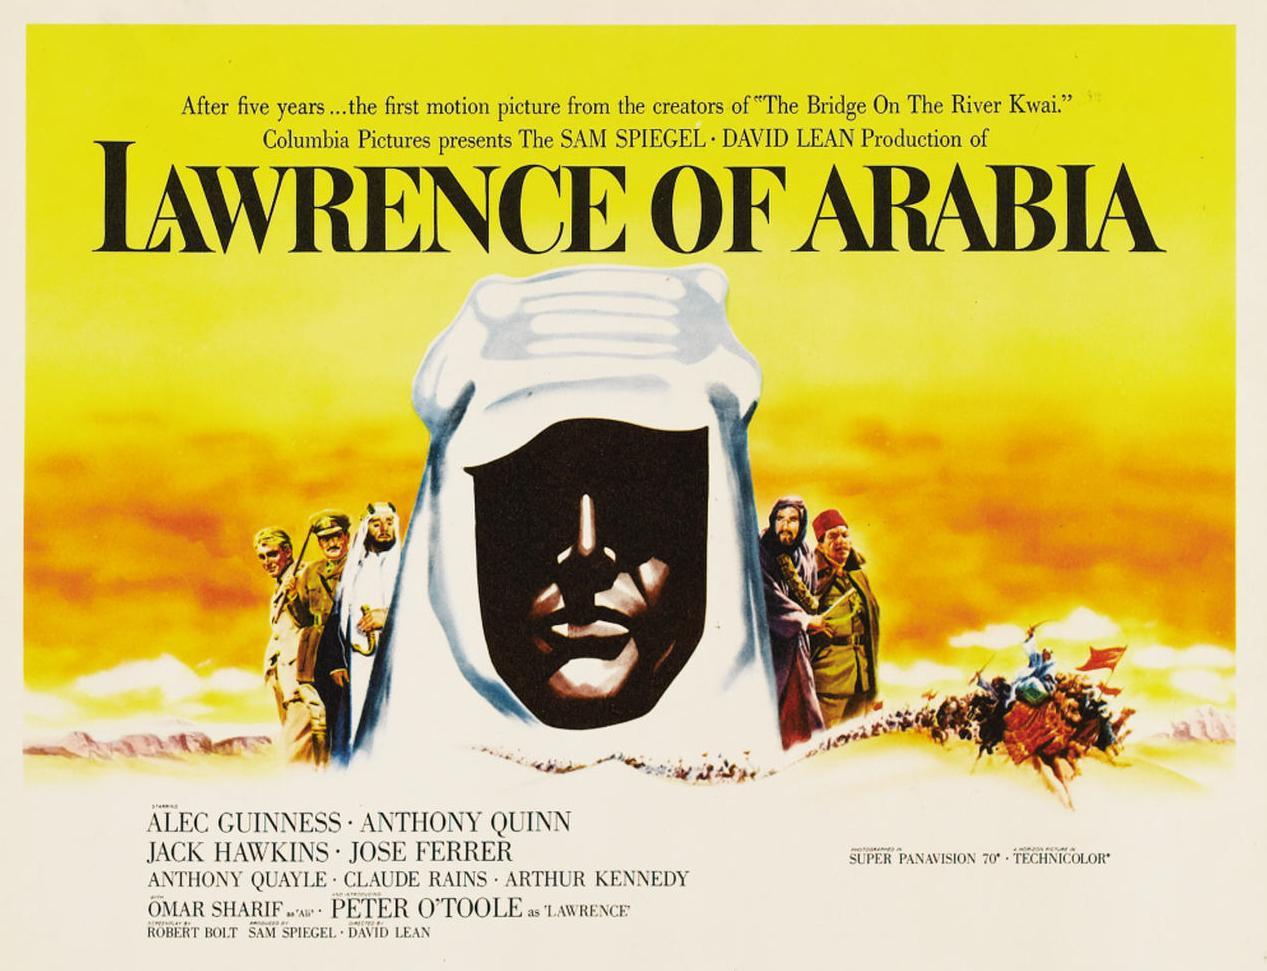 High Resolution Wallpaper | Lawrence Of Arabia 1267x971 px